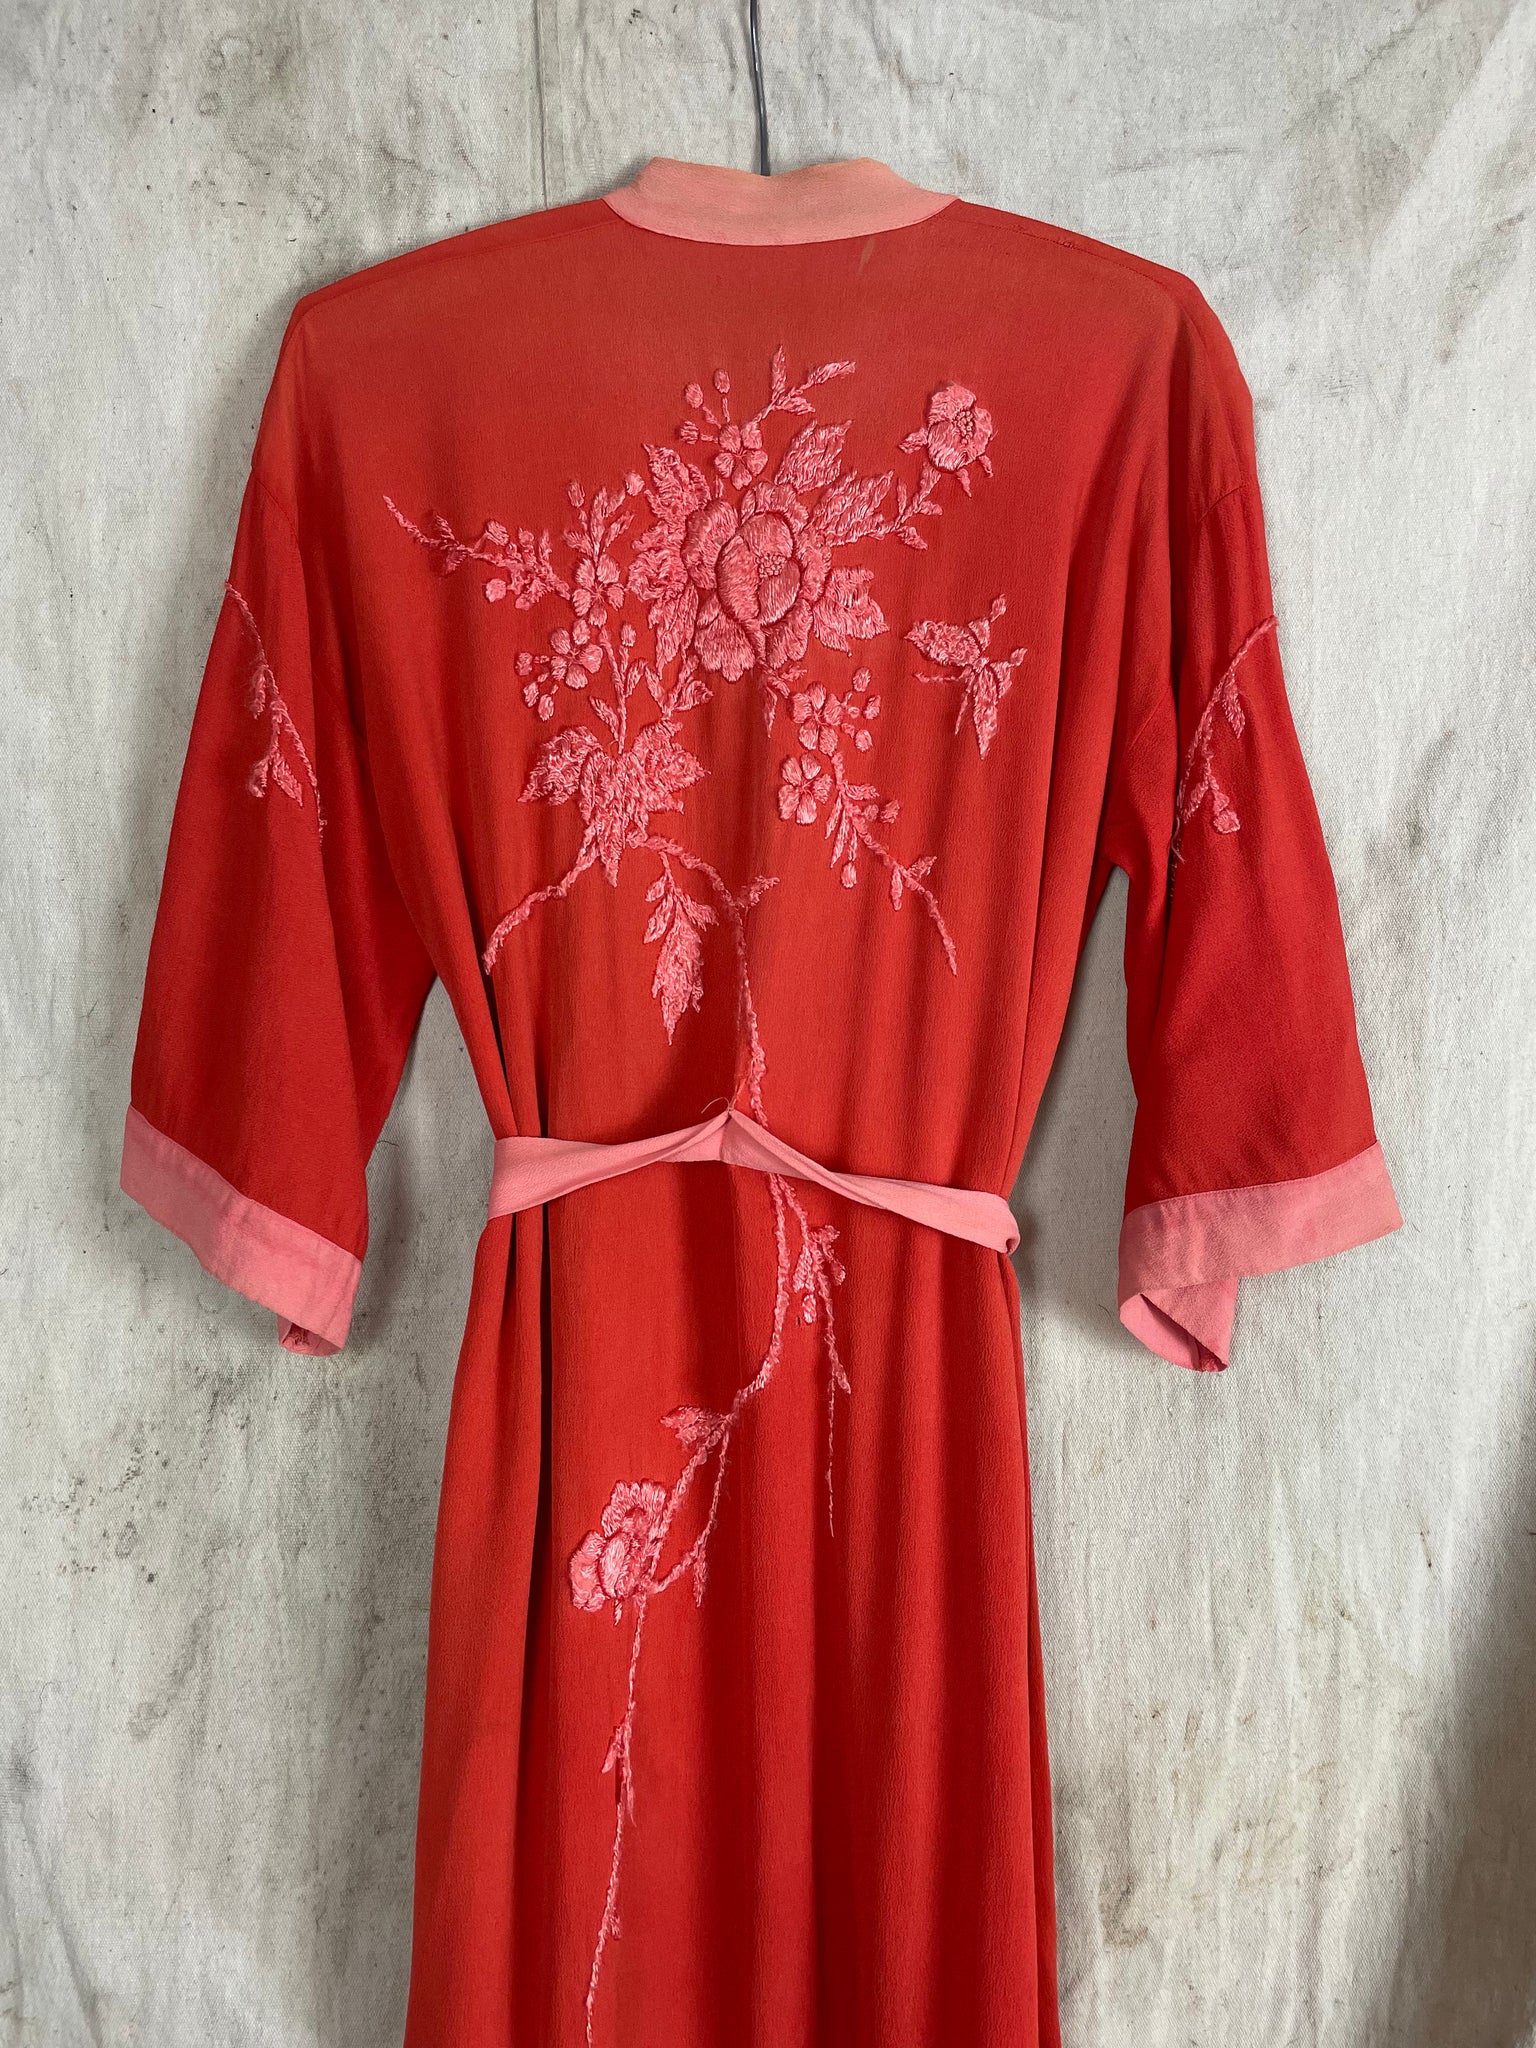 1930s/ 1940s Rayon Crepe Japanese Embroidered Robe Dressing Gown